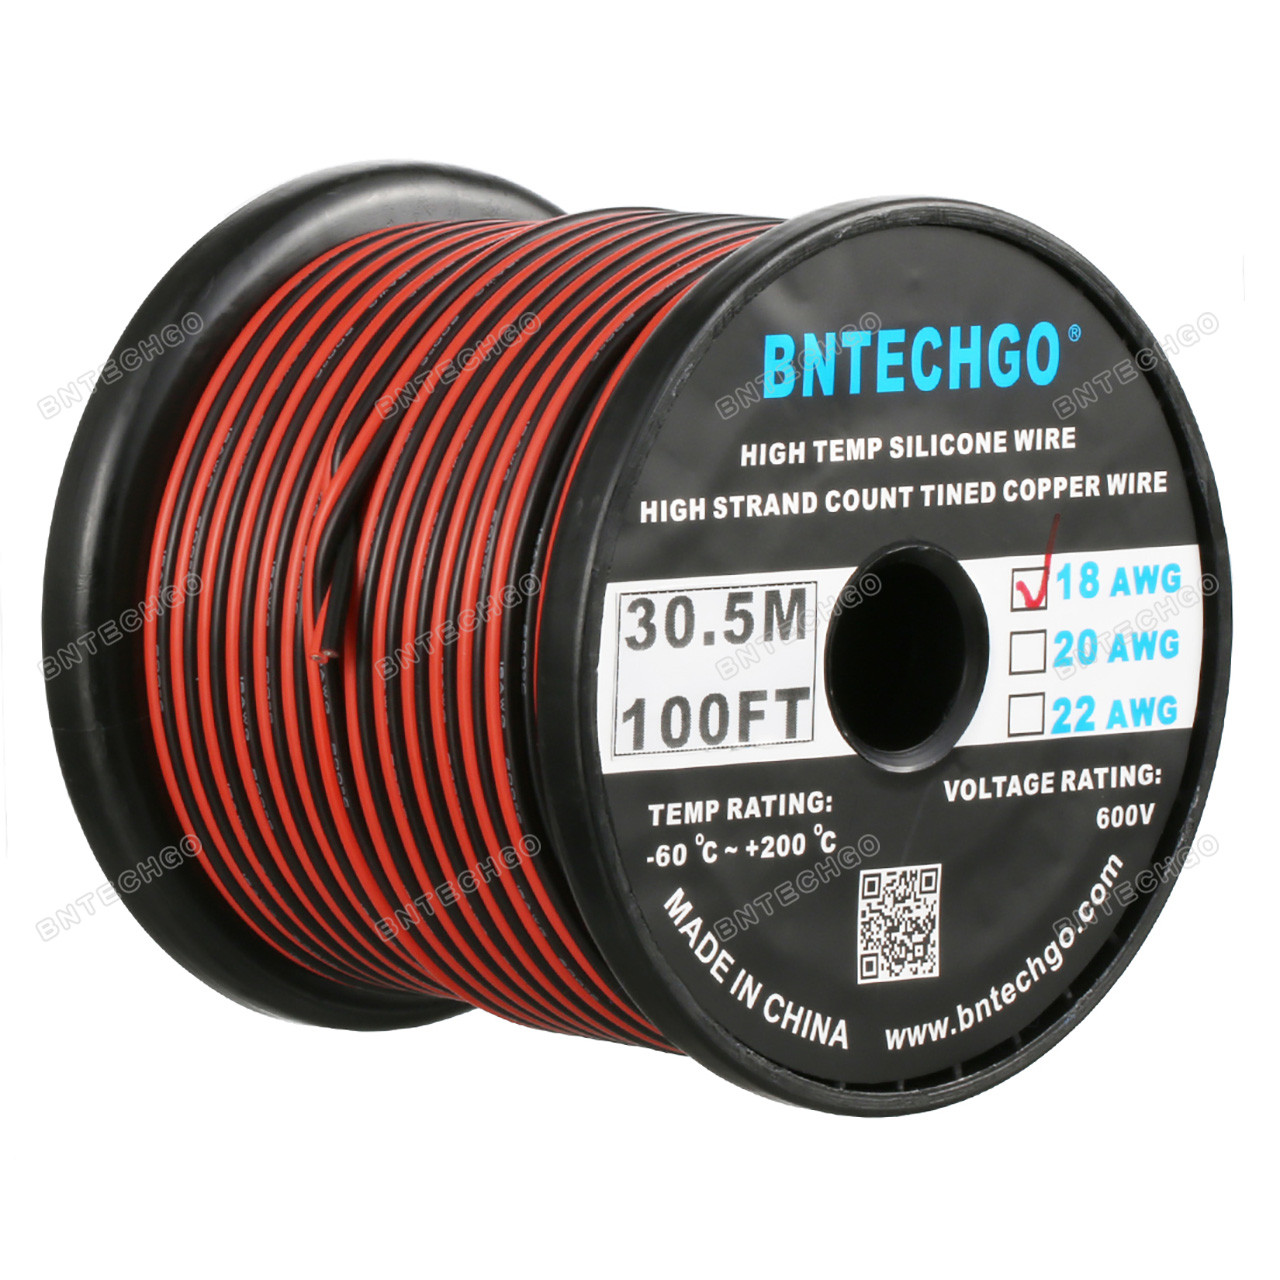 BNTECHGO 18 Gauge Flexible 2 Conductor Parallel Silicone Wire Spool Red  Black High Resistant 200 deg C 600V for Single Color LED Strip Extension  Cable